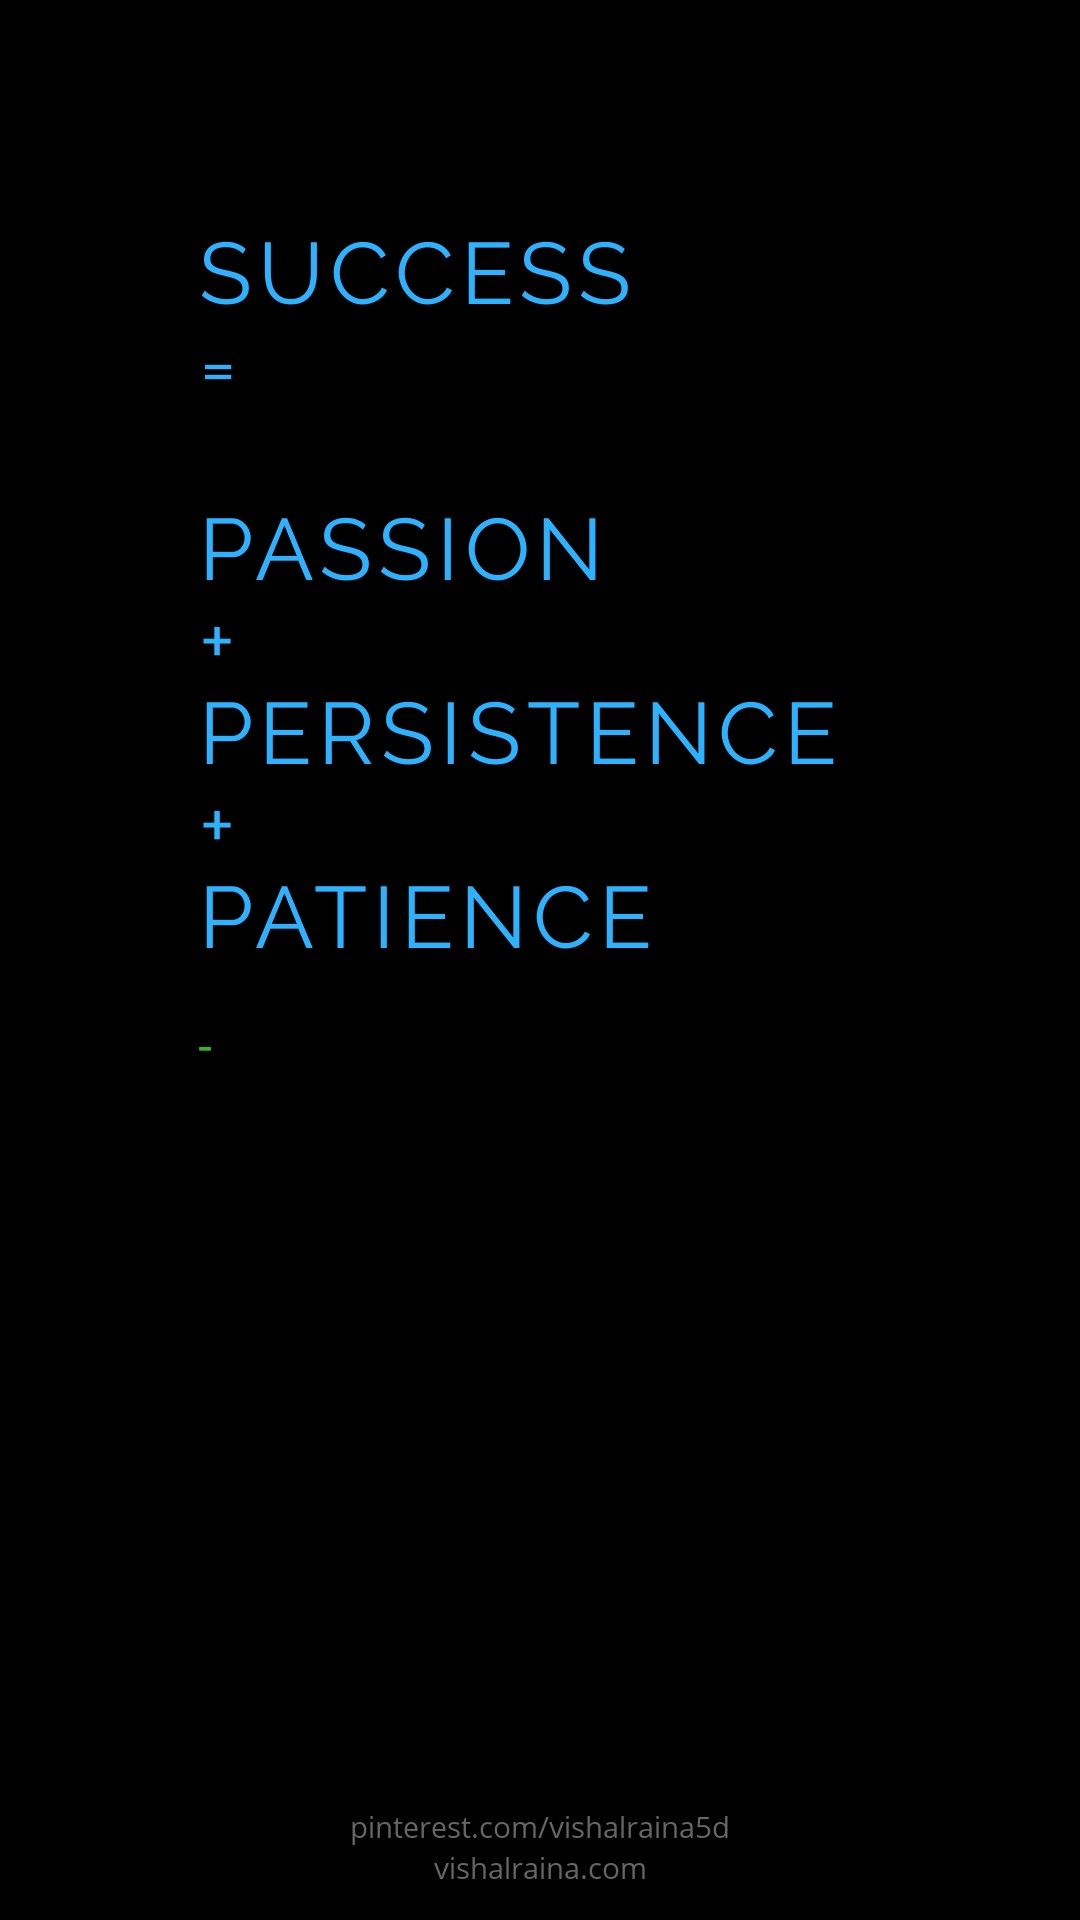 SUCCESS = PASSION + PERSISTENCE + PATIENCE wallpaper. Positive quotes, Motivational quotes, Life quotes